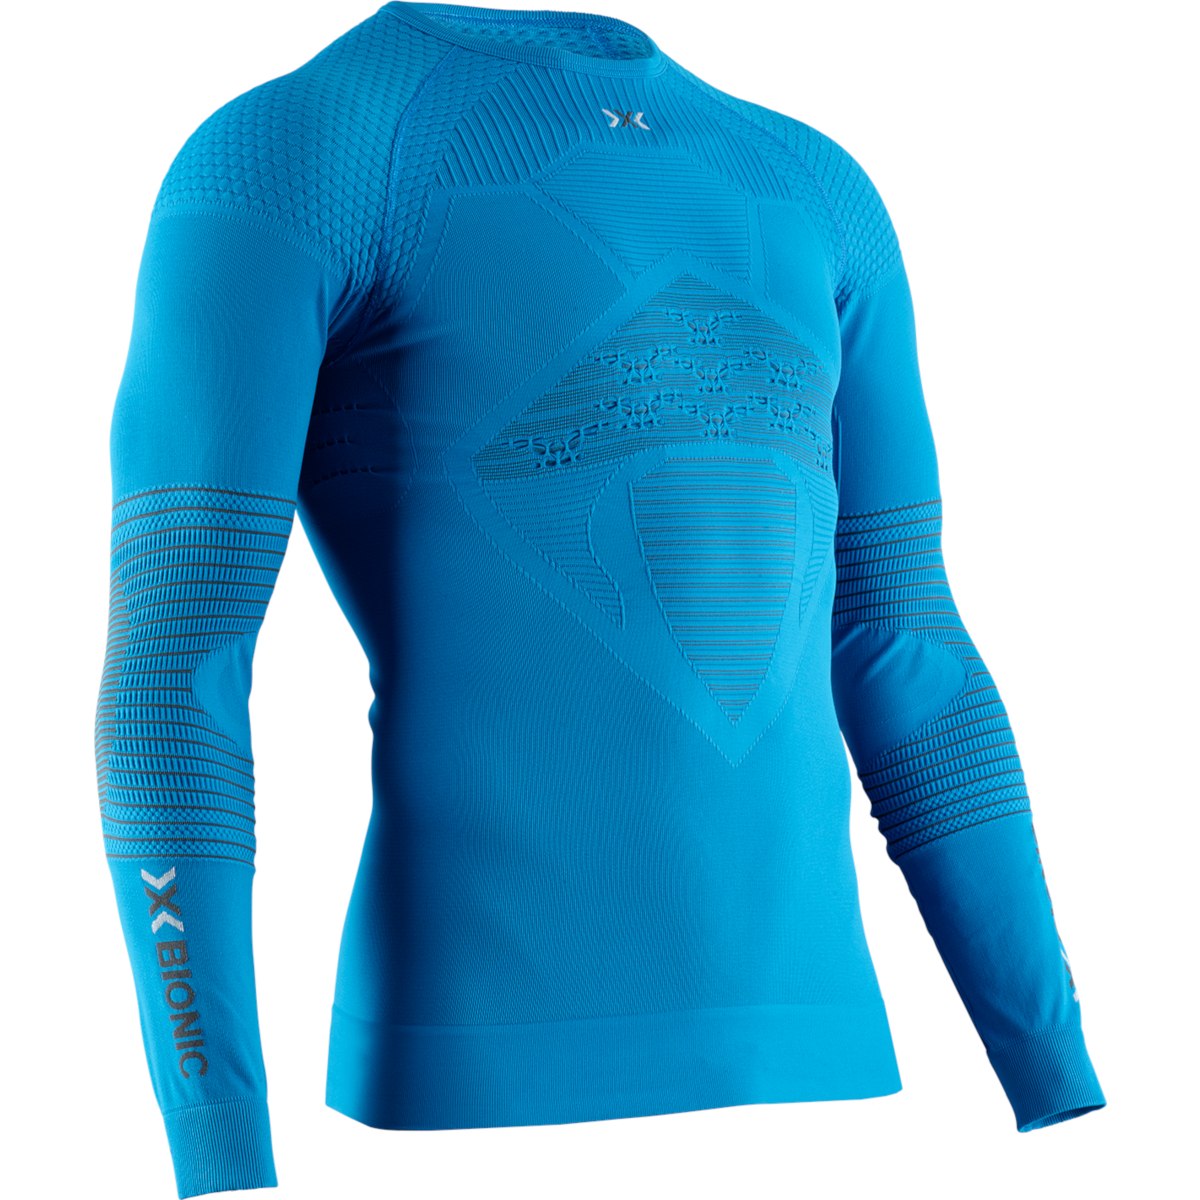 Picture of X-Bionic Energizer 4.0 Round Neck Long Sleeves Shirt - teal blue/anthracite